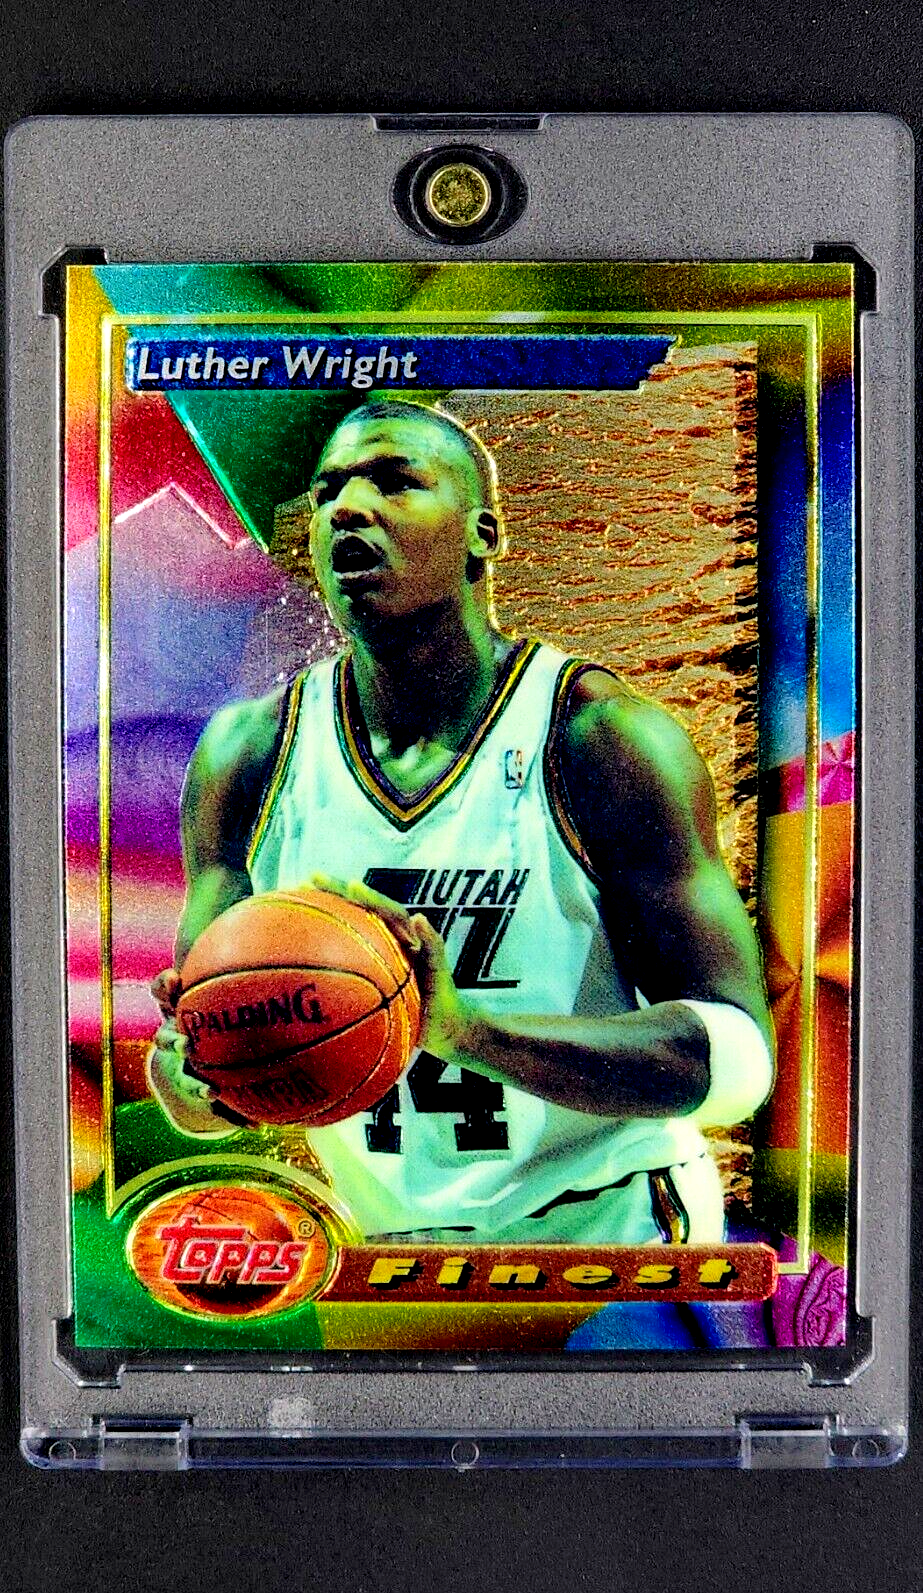 1993 1993-94 Topps Finest #196 Luther Wright Utah Jazz Card *Nice Condition* - $1.99